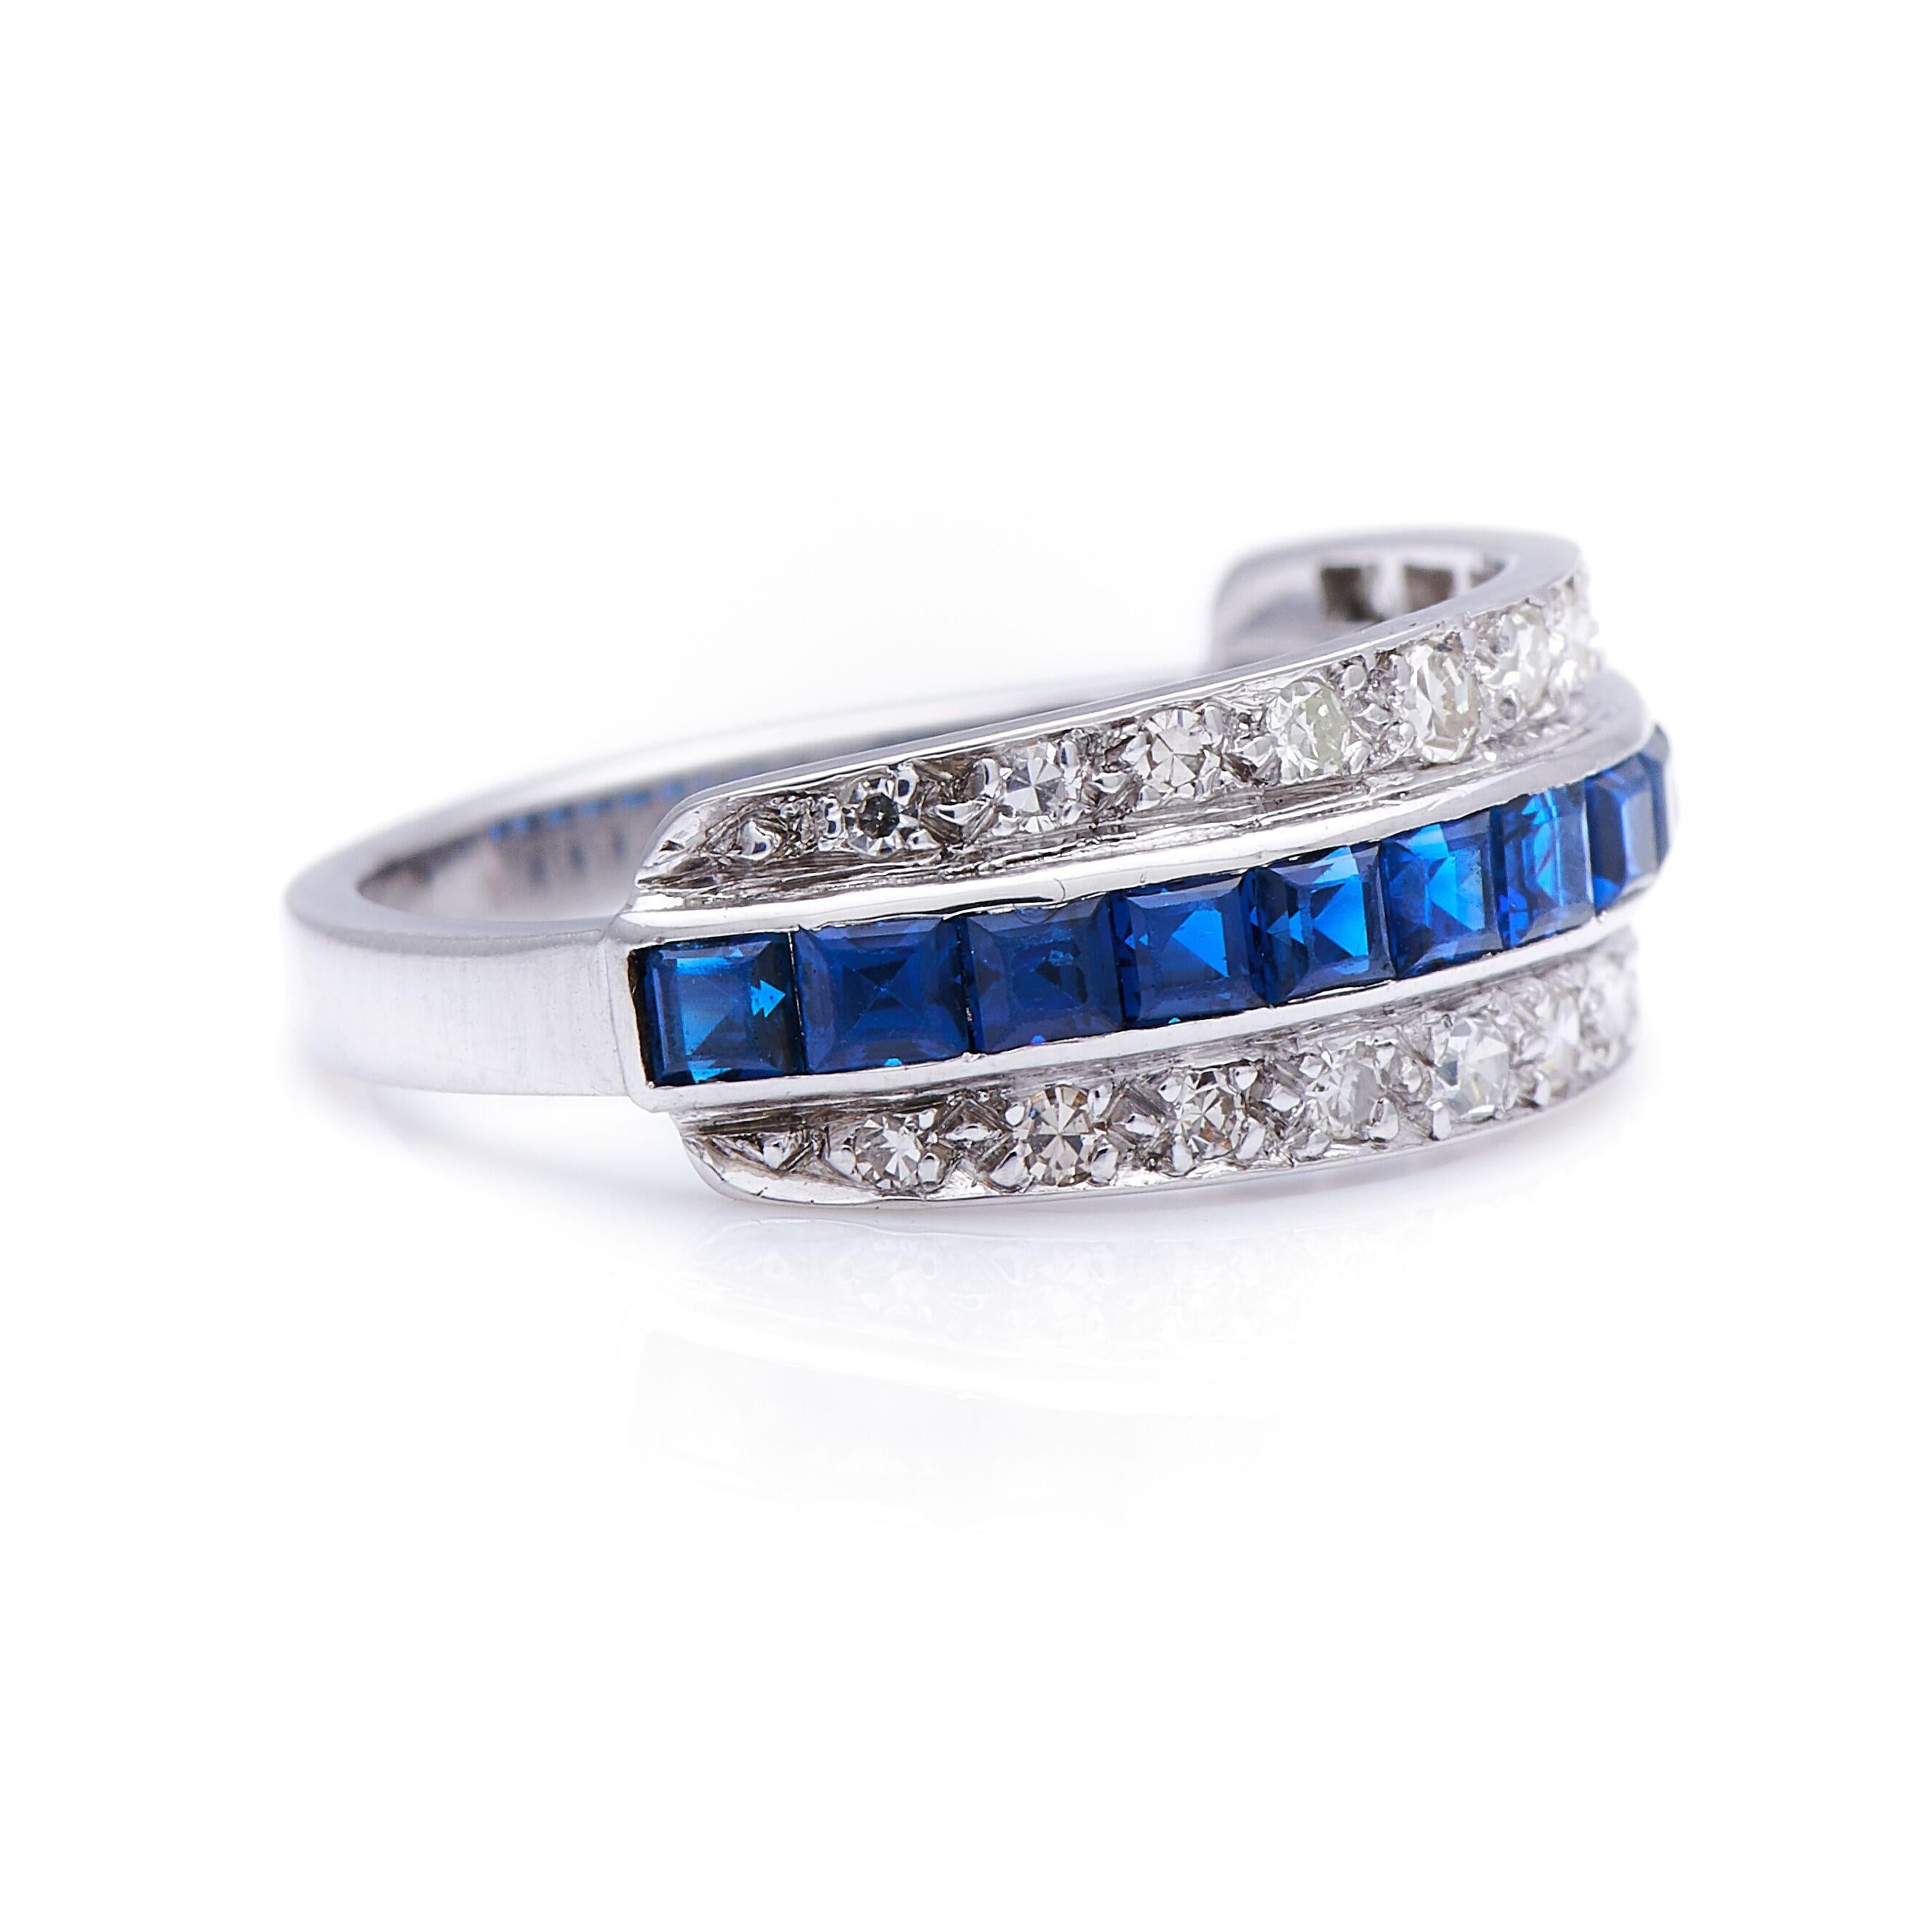 Sapphire and diamond ring, 1920s. This simple and elegant design is actually fiendishly difficult to produce, requiring perfectly sized sapphires and mastery of different setting techniques. The calibré-cut sapphires would have been shaped